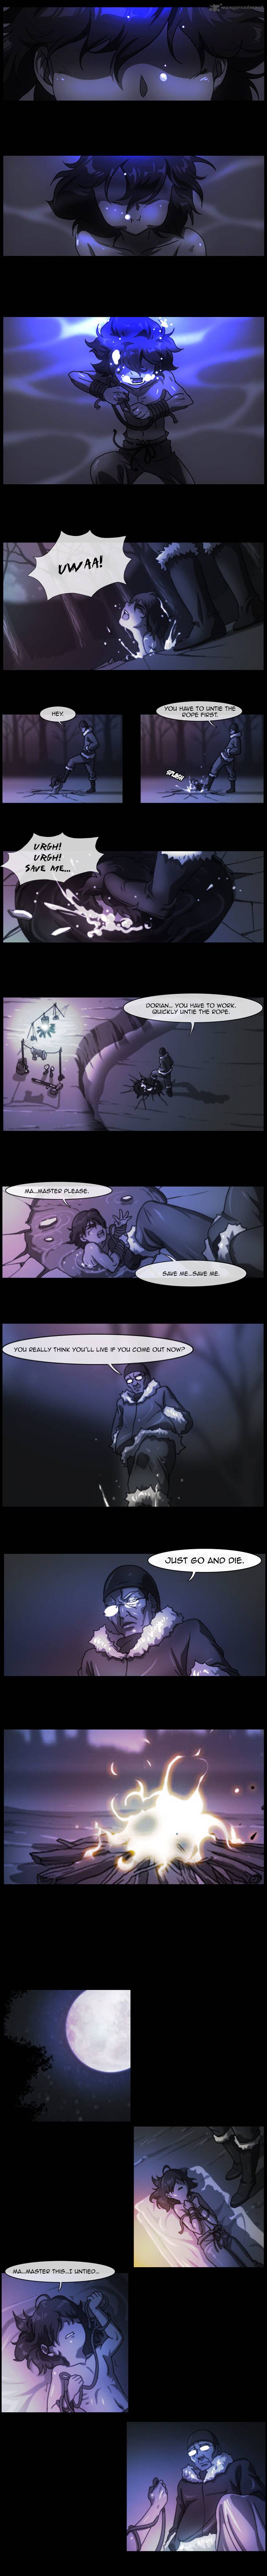 Over Steam Chapter 5 Page 4